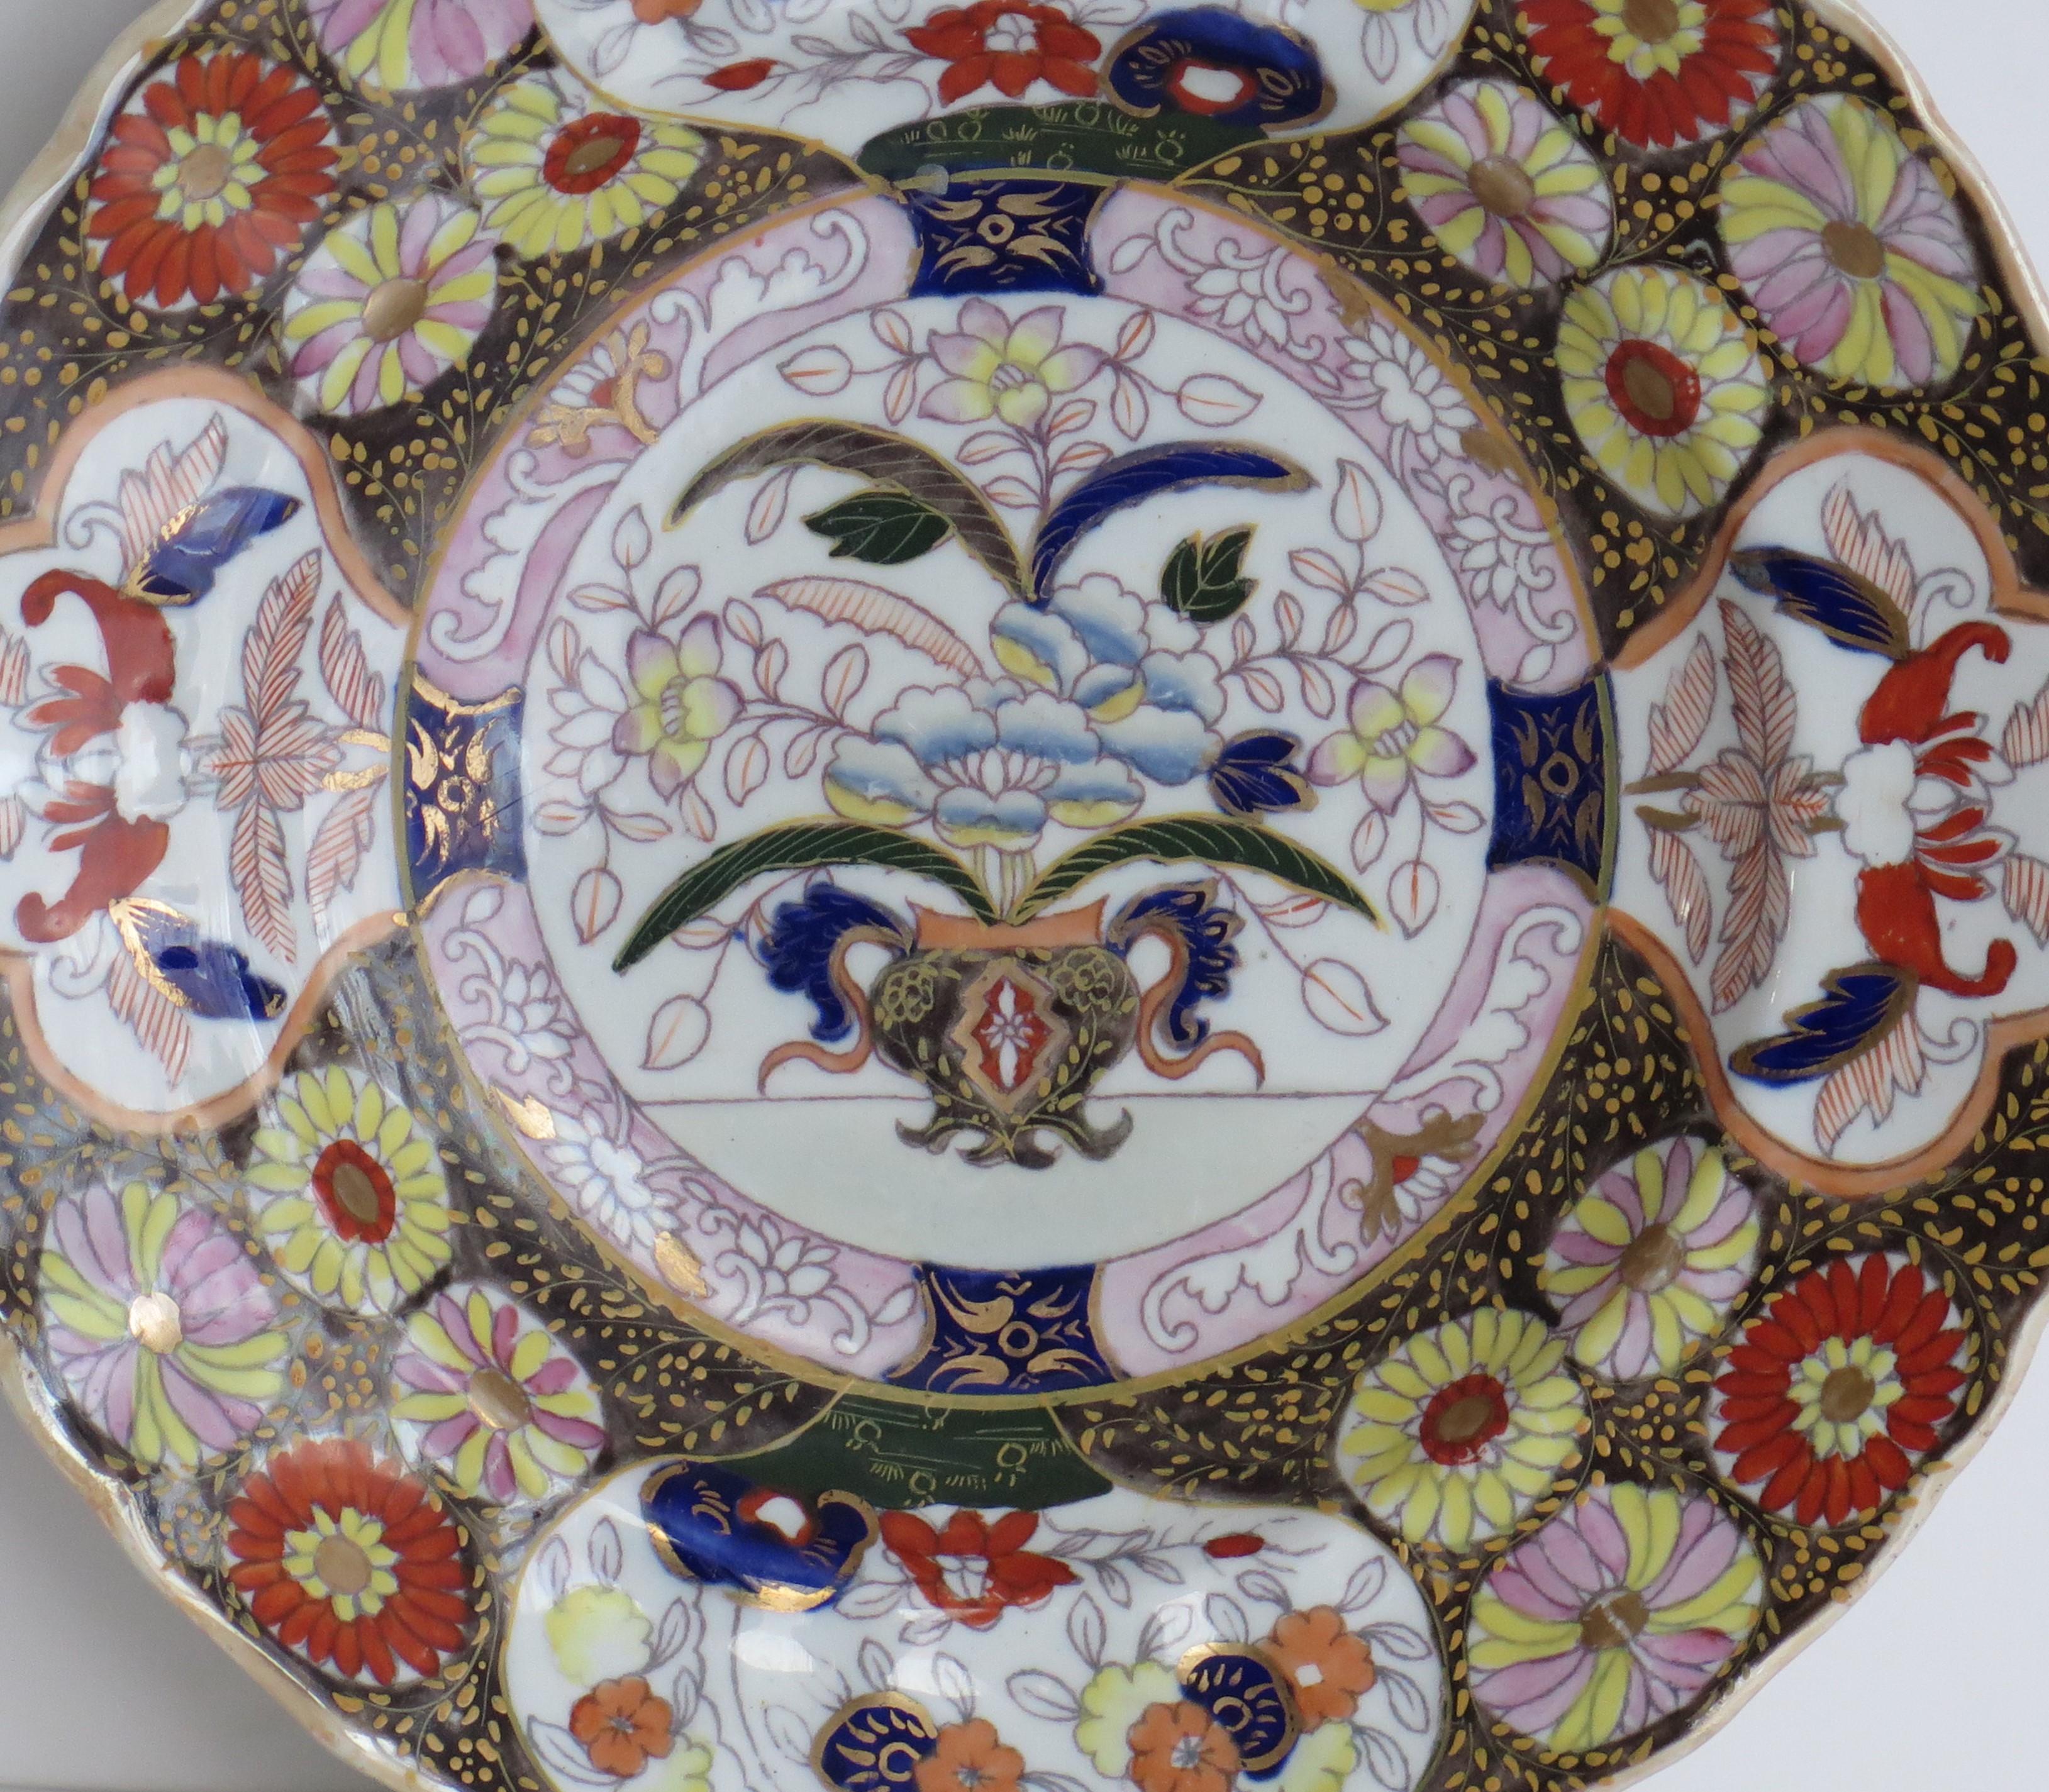 This is a fine ironstone pottery side plate made by the Mason's factory at Lane Delph, Staffordshire, England and beautifully decorated in the Vase and Chrysanthemum pattern, fully stamped and dating to the William 1Vth period, circa 1835.

This